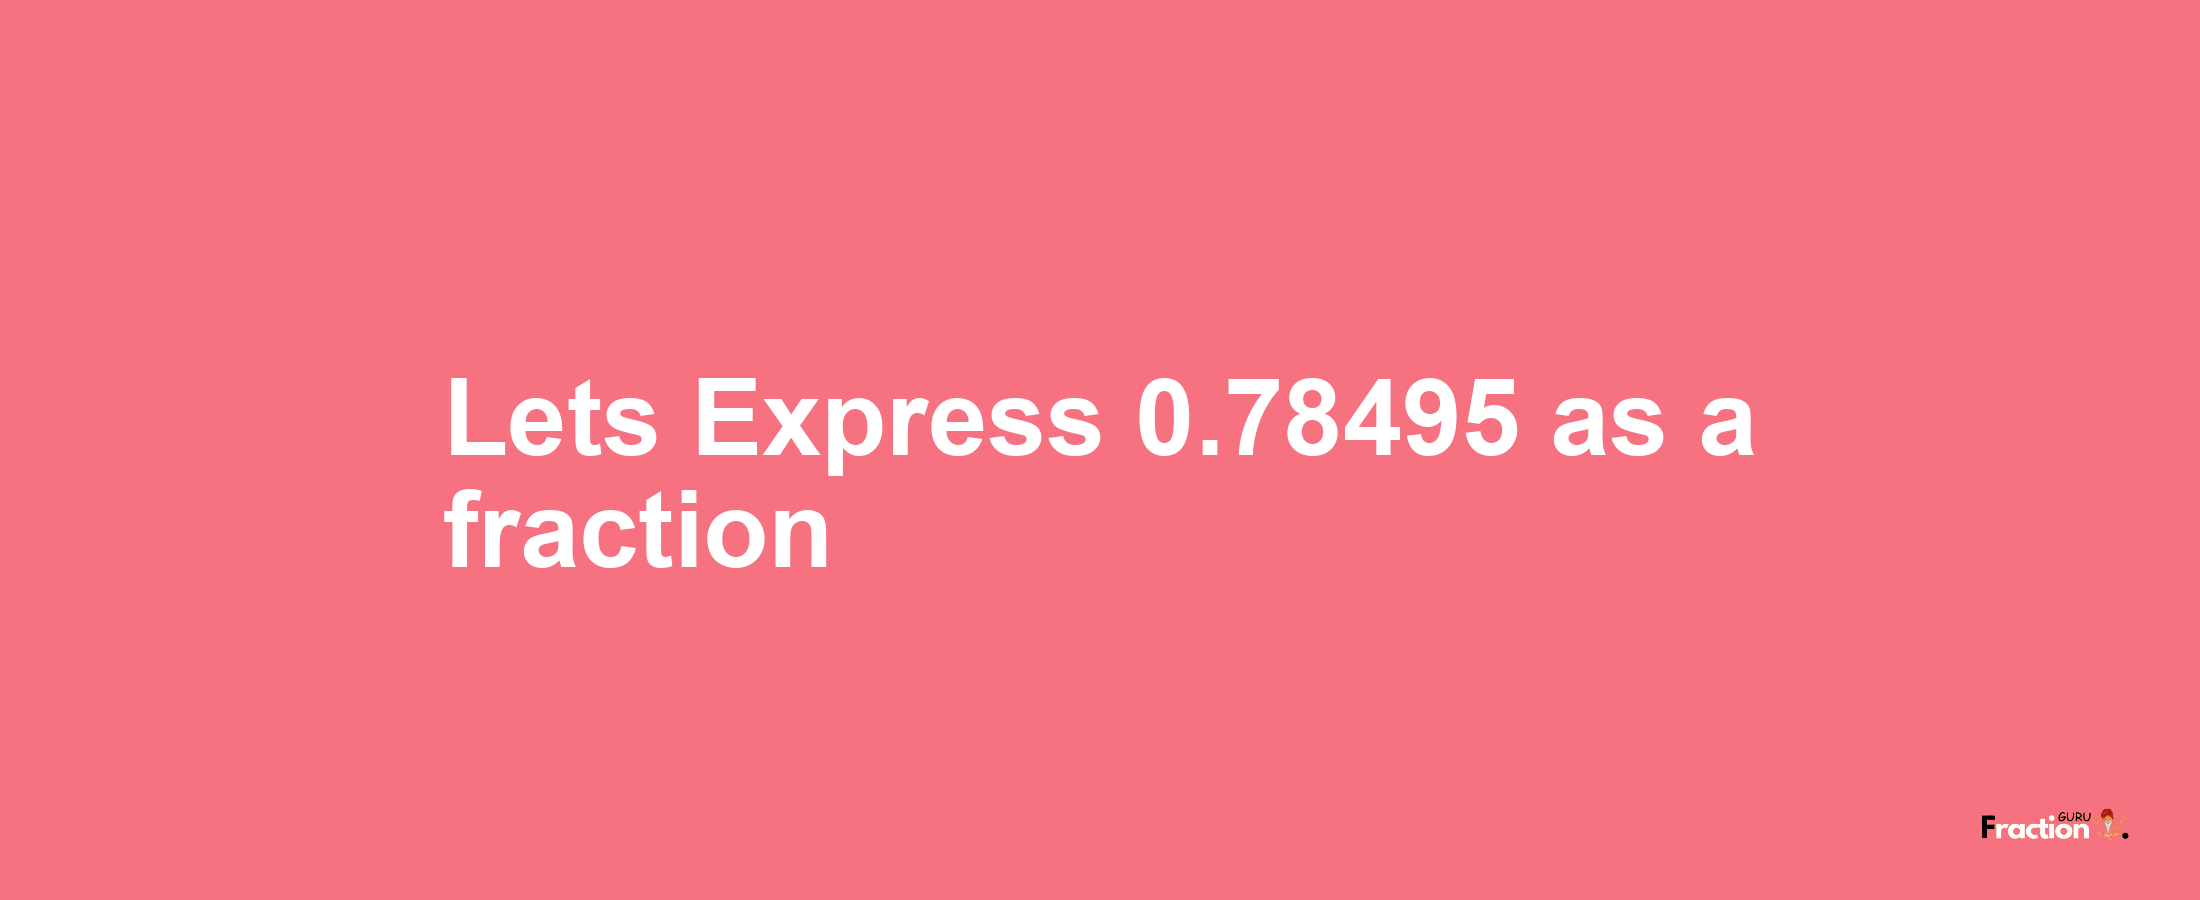 Lets Express 0.78495 as afraction